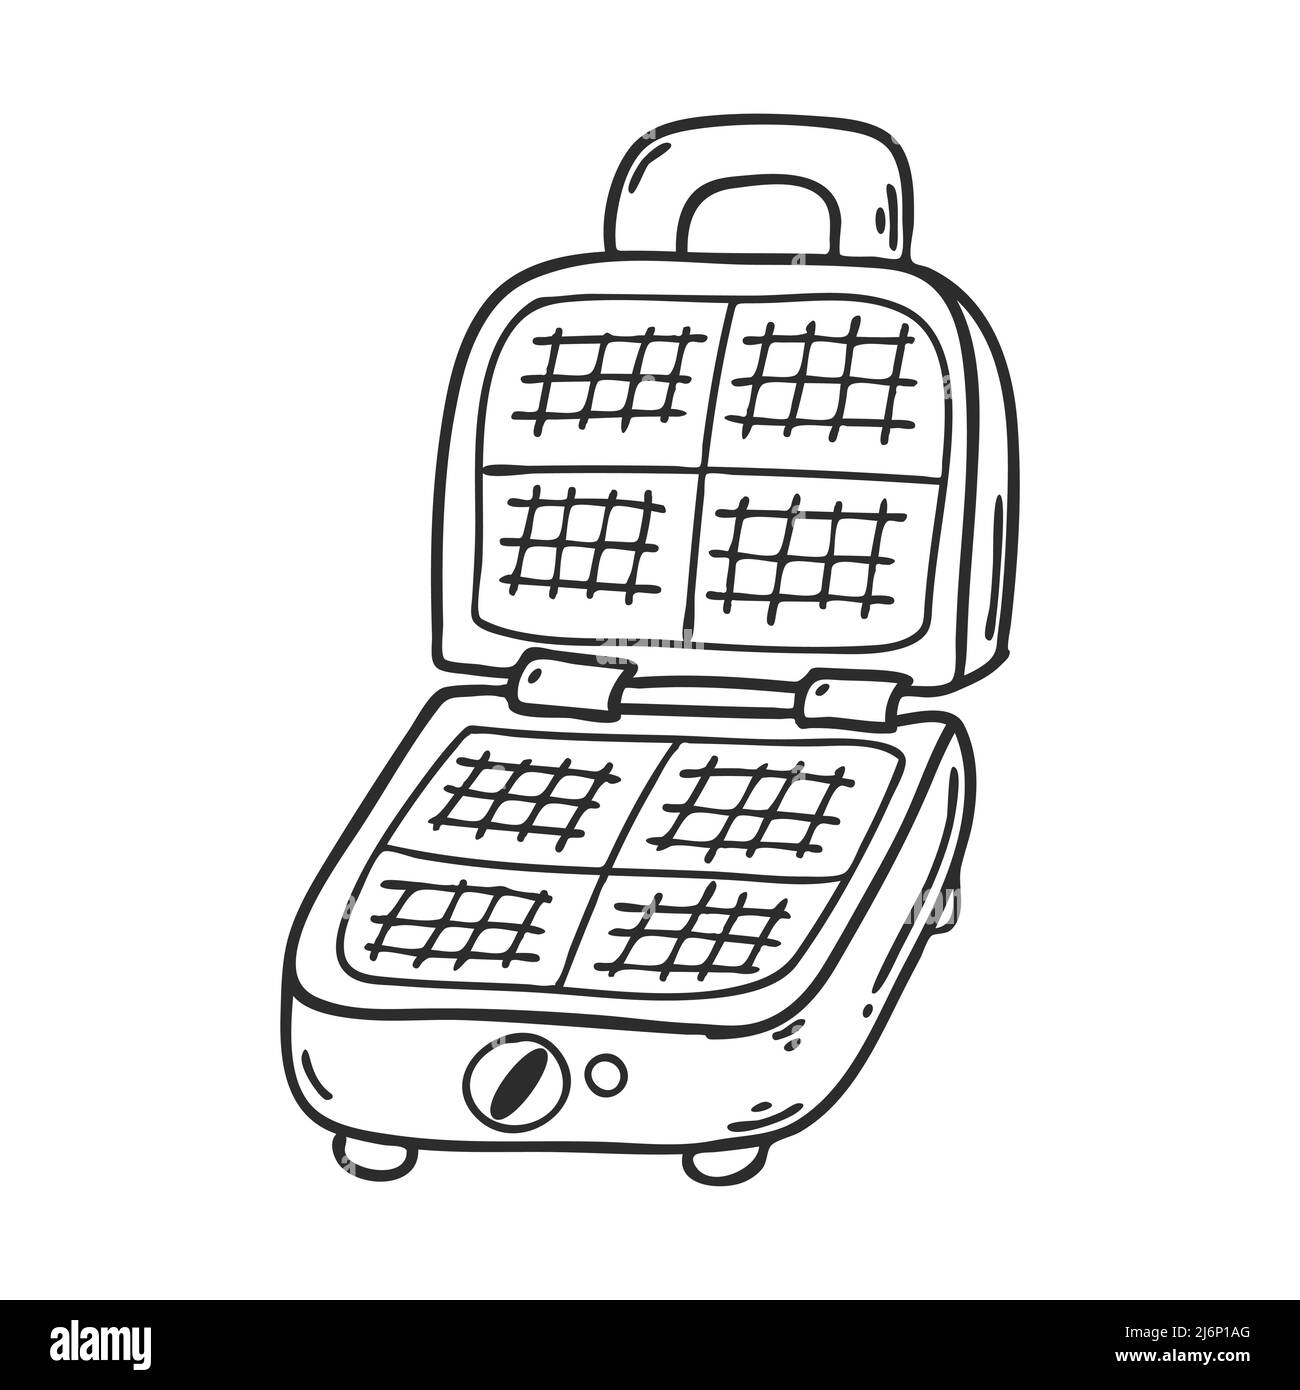 Electric waffle iron in Doodle style. Kitchen appliances for cooking waffles. Design element for menu design, recipes, and food packaging. Hand drawn Stock Vector